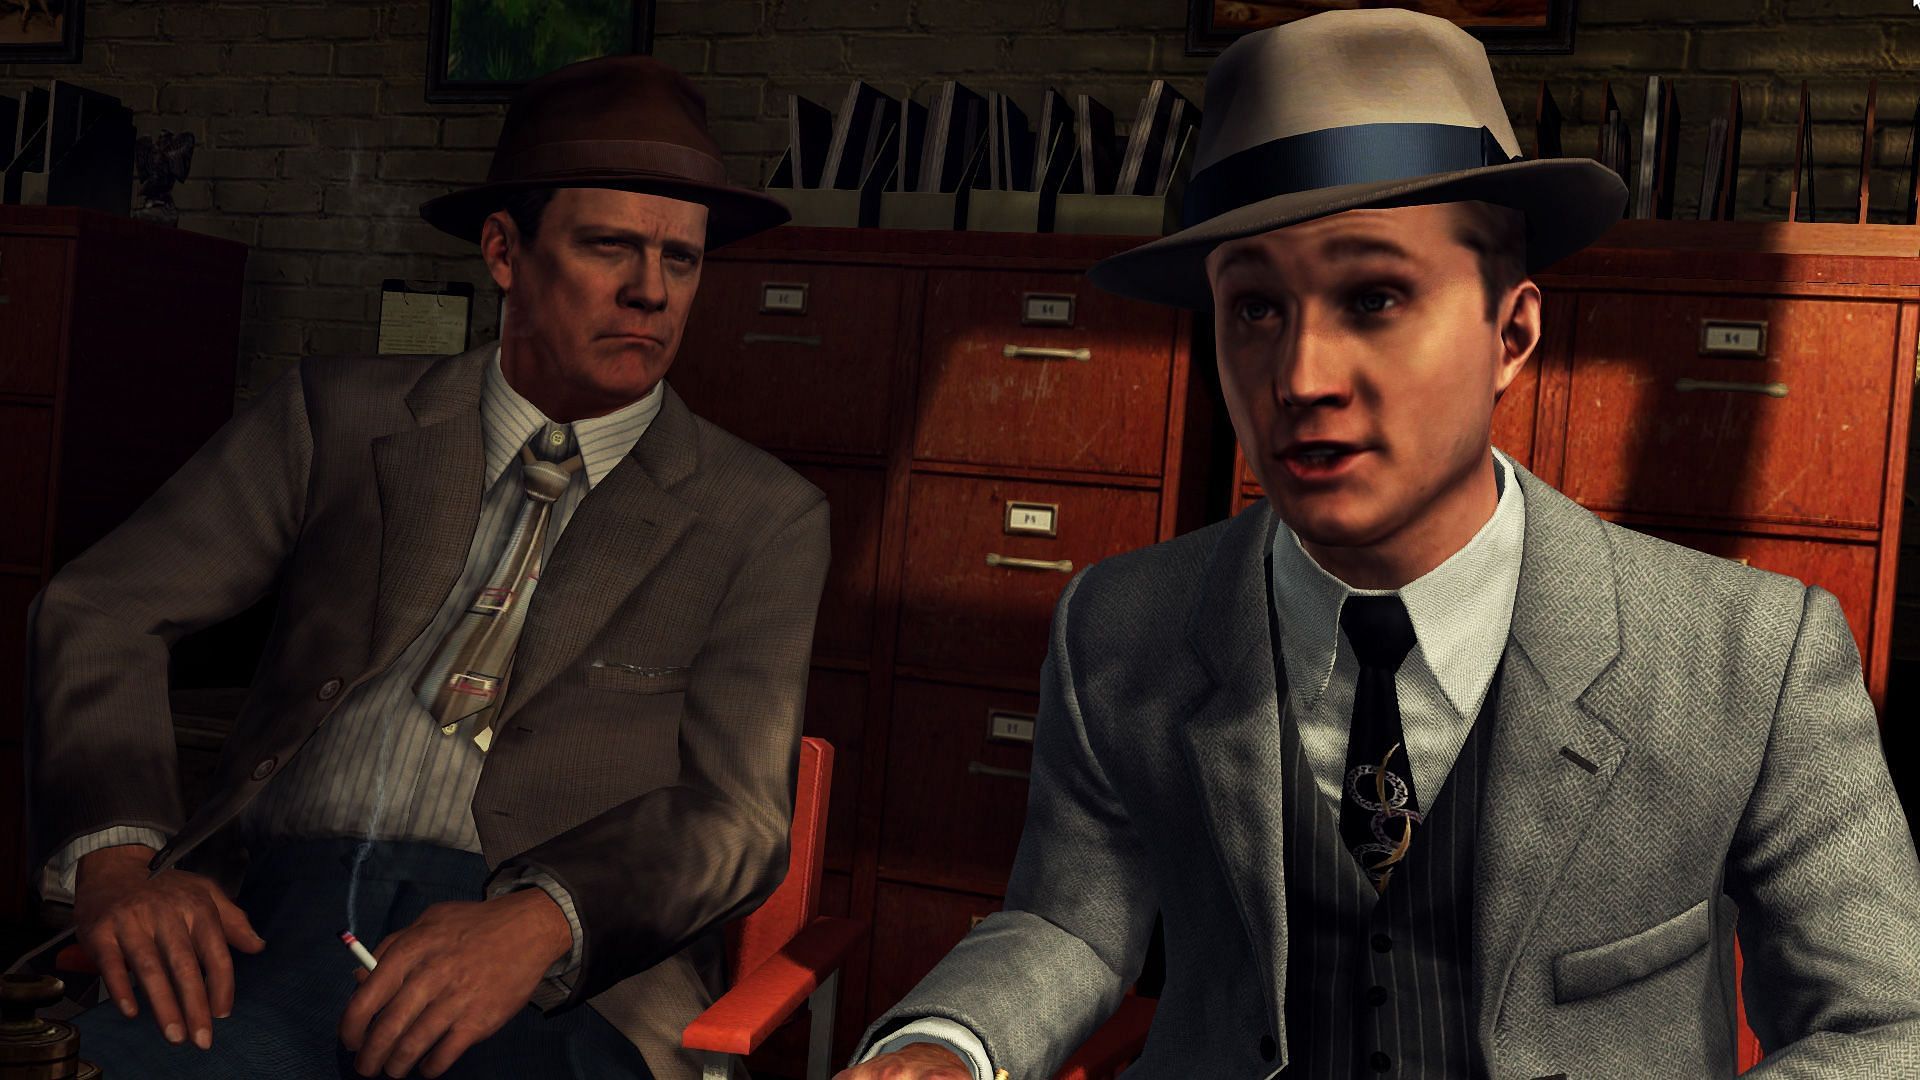 L.A. Noire is a fun detective/mystery video game by Rockstar Games (Image via Rockstar Games)